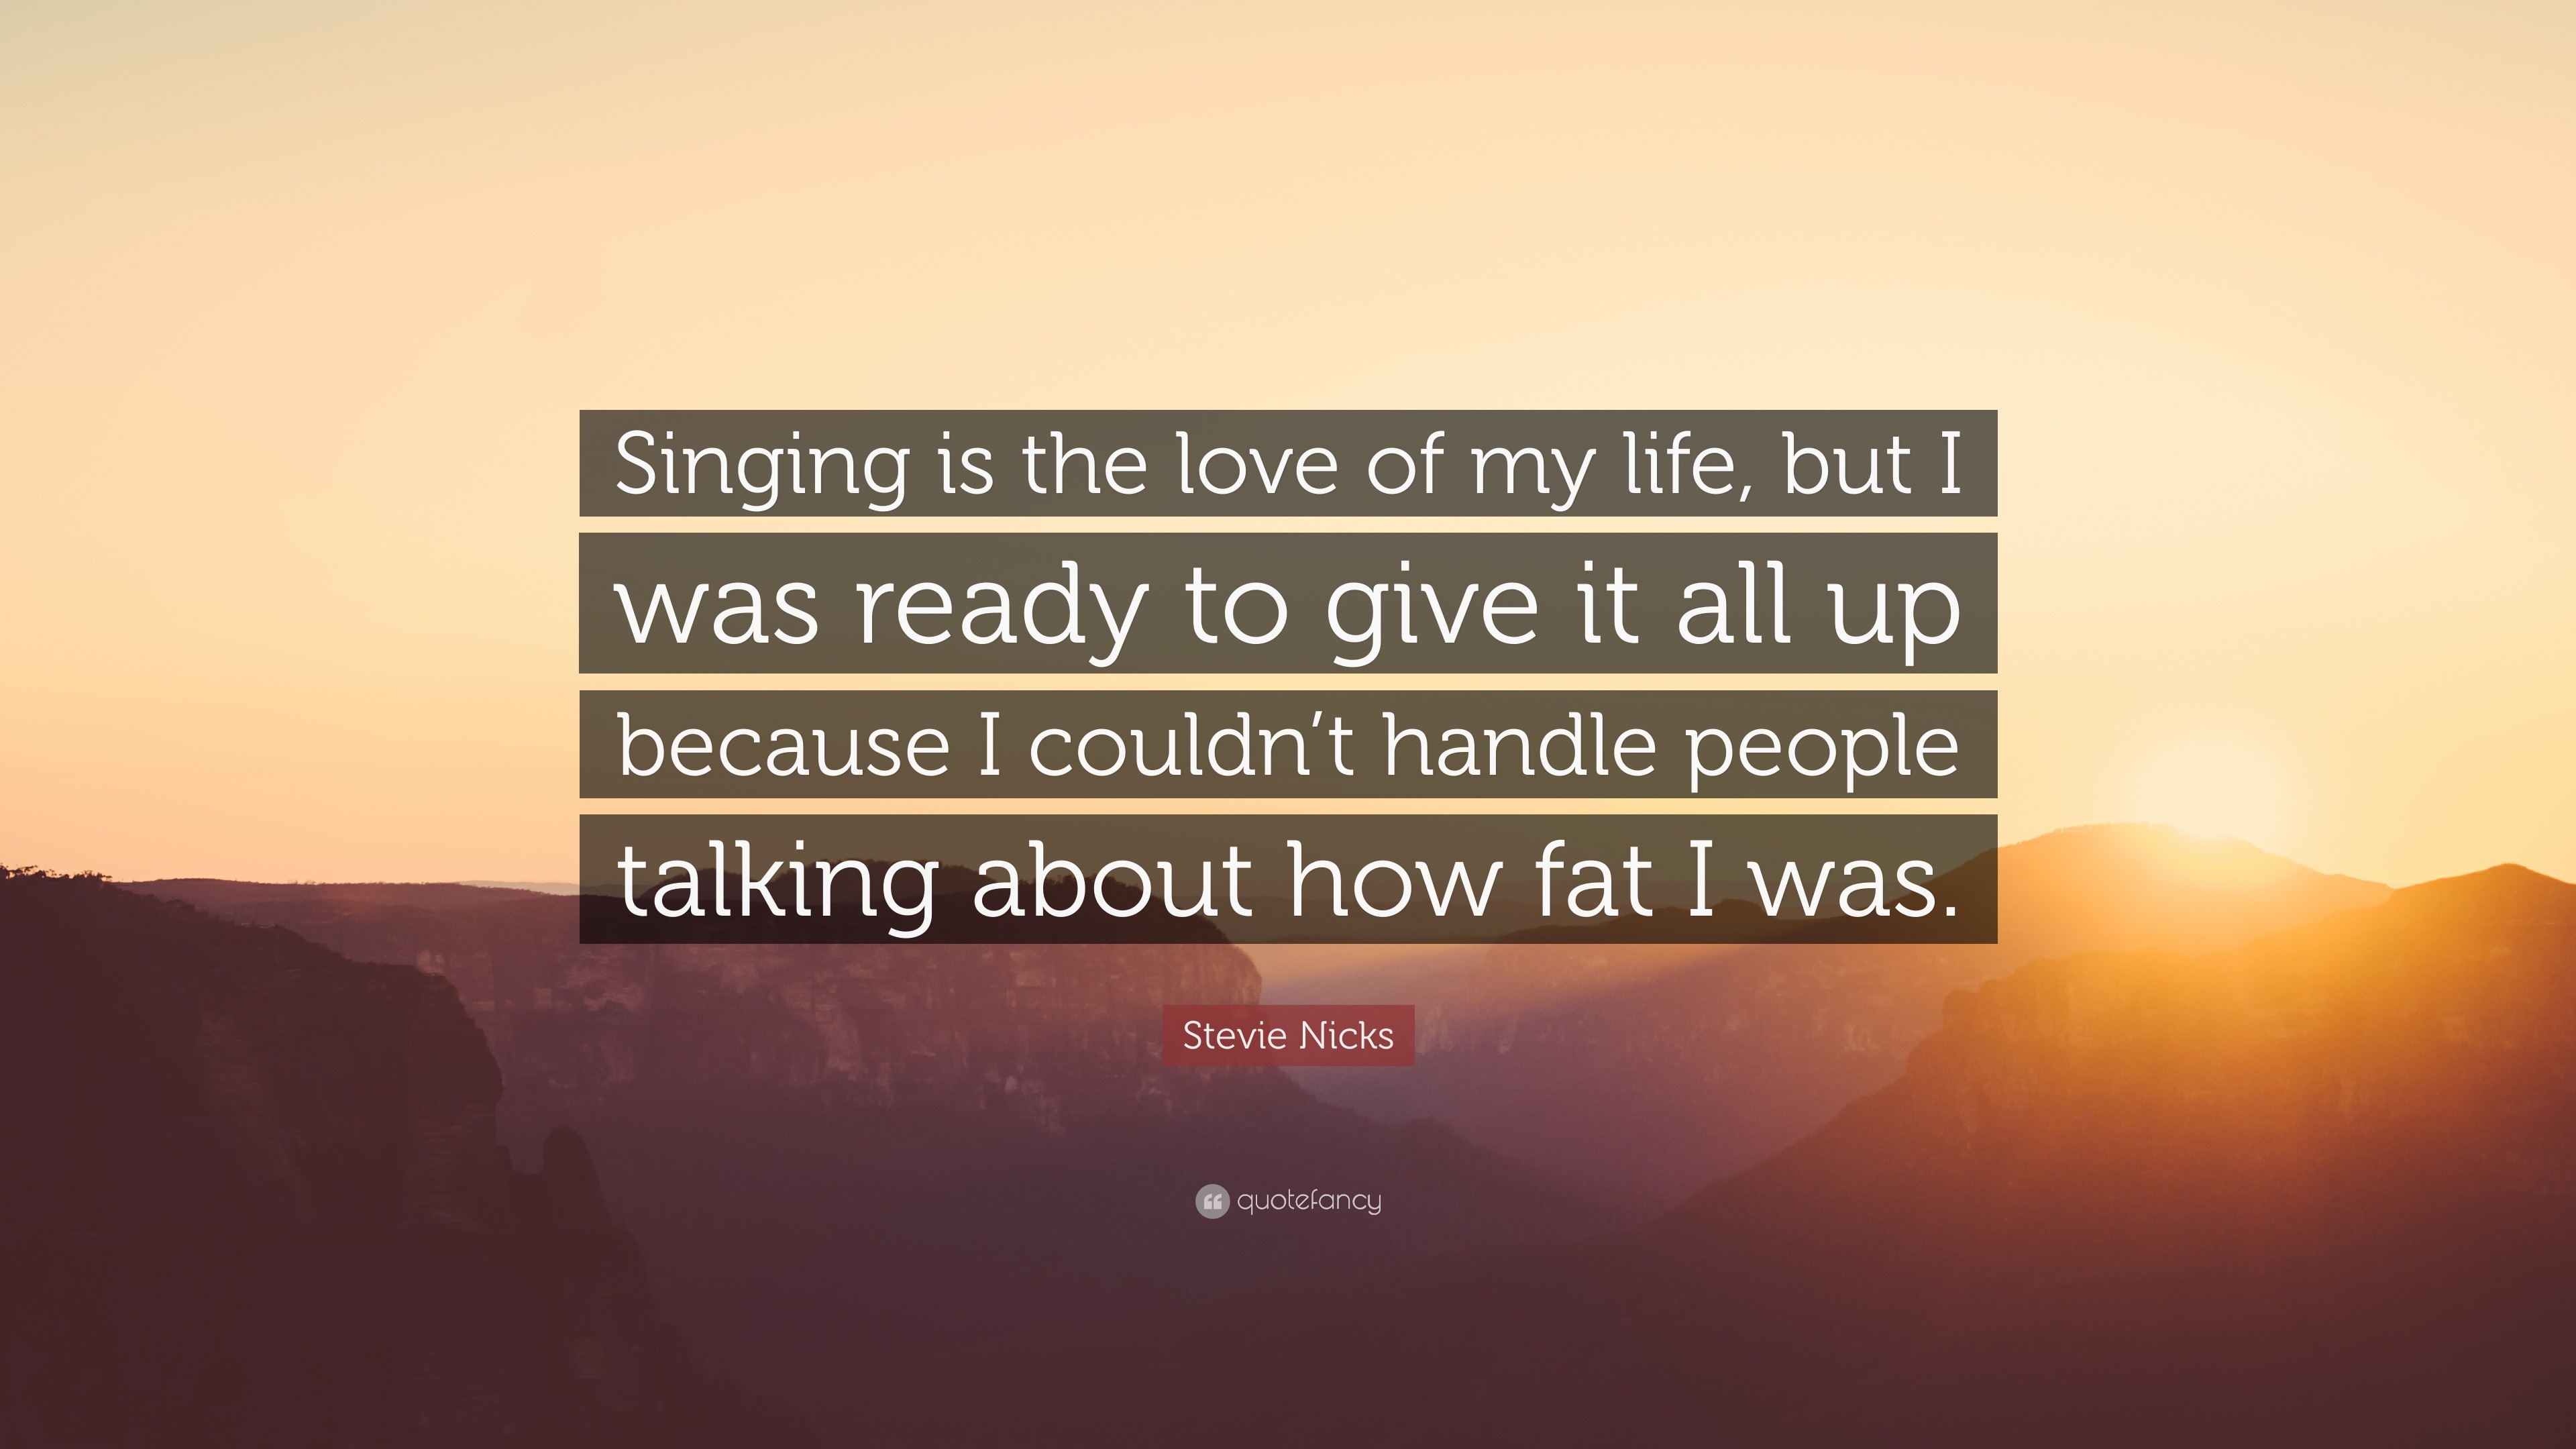 Stevie Nicks Quote “Singing is the love of my life but I was